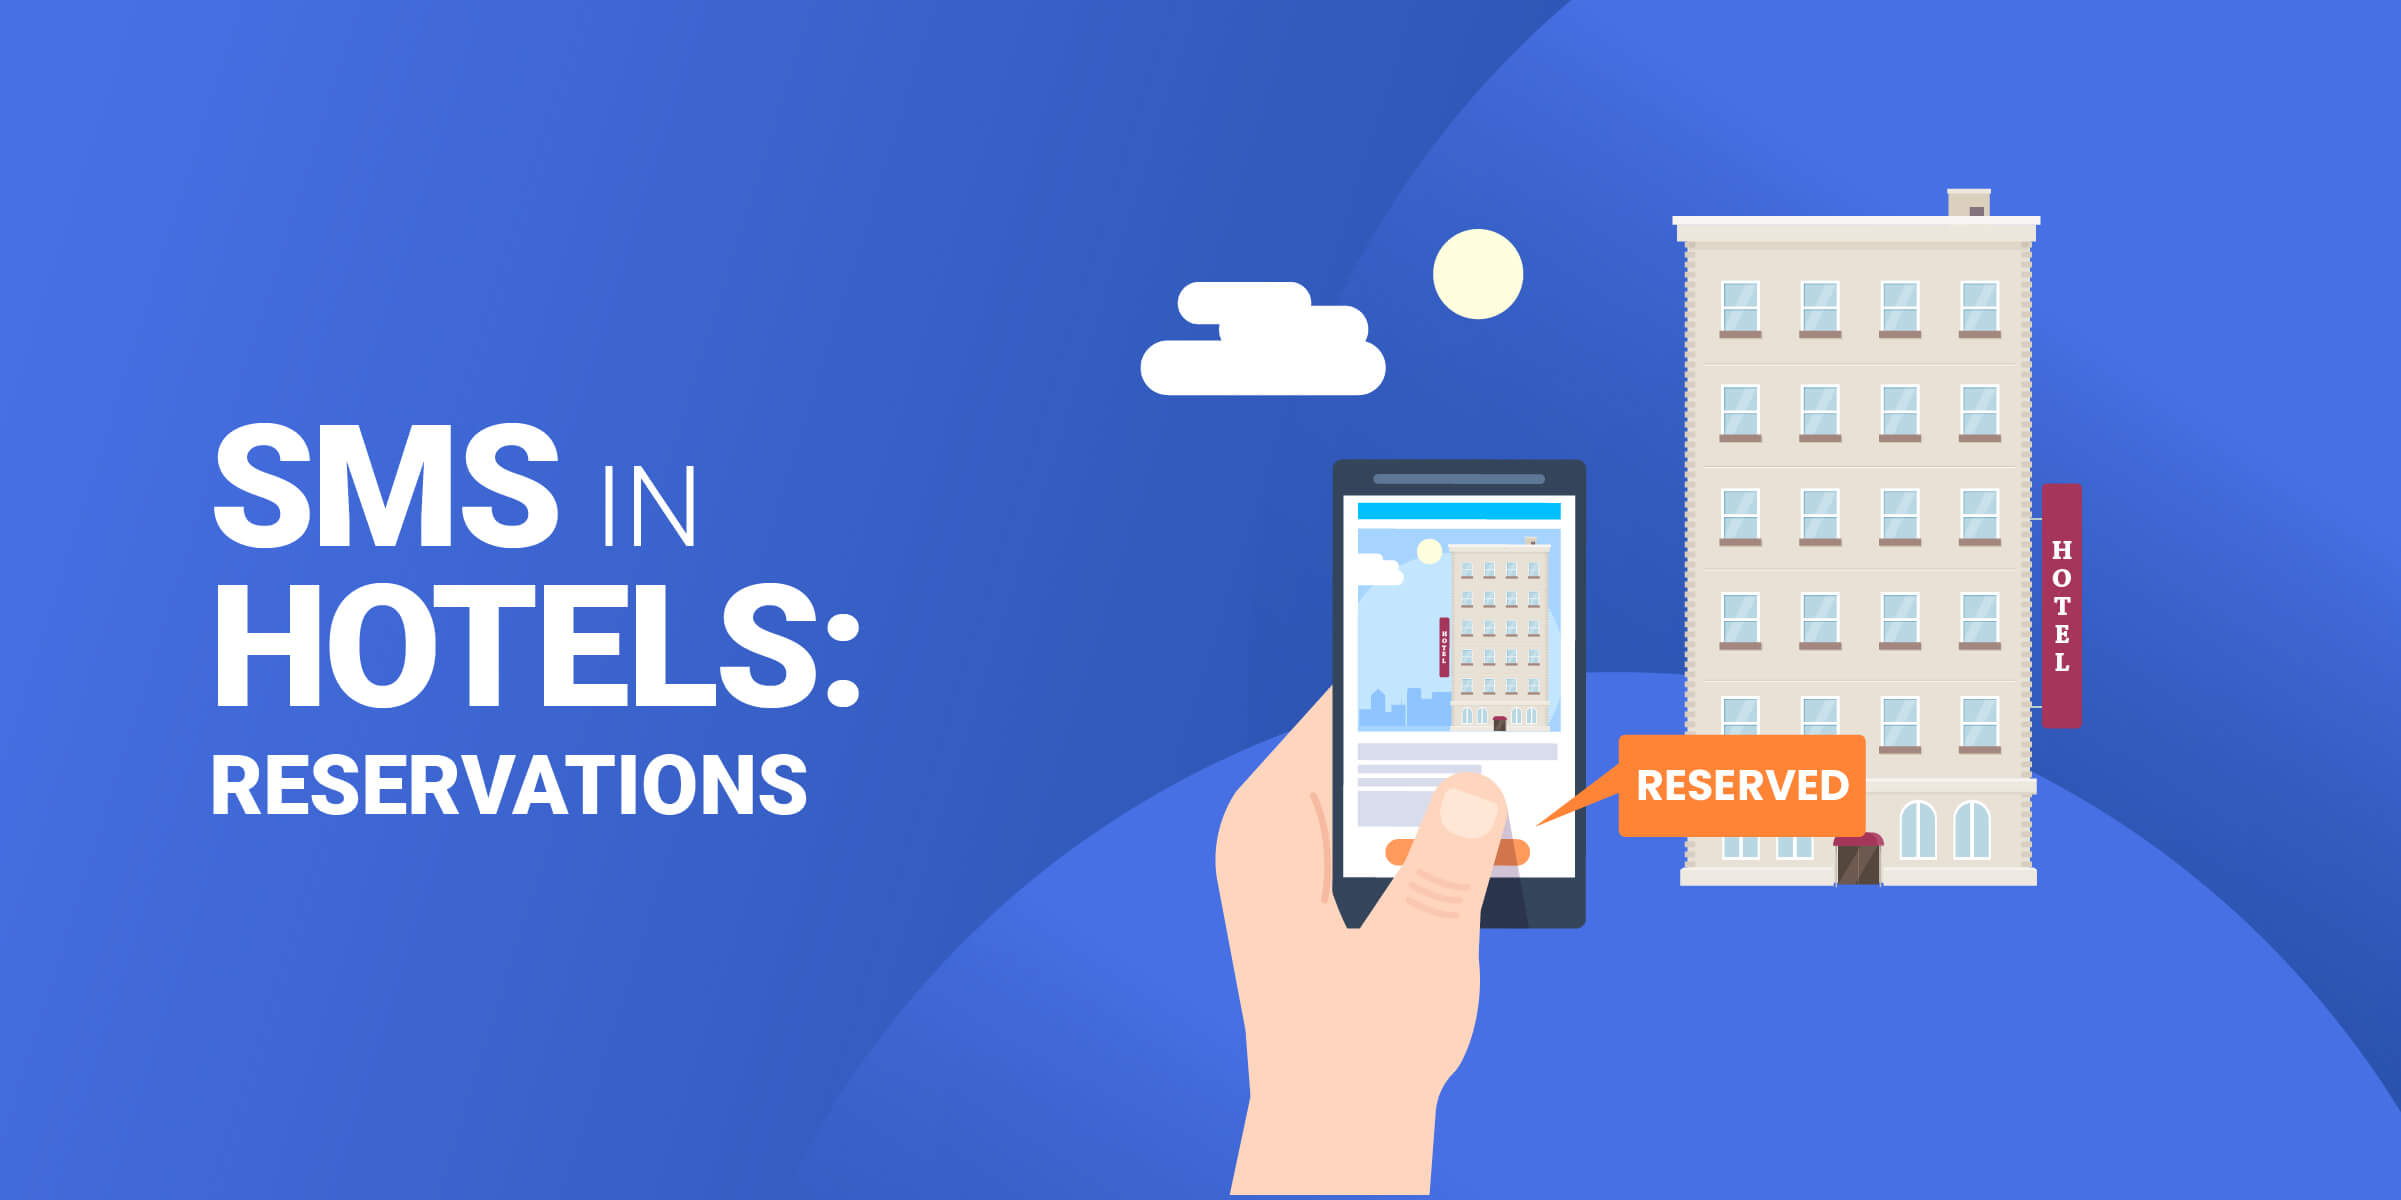 SMS in Hotels Reservations